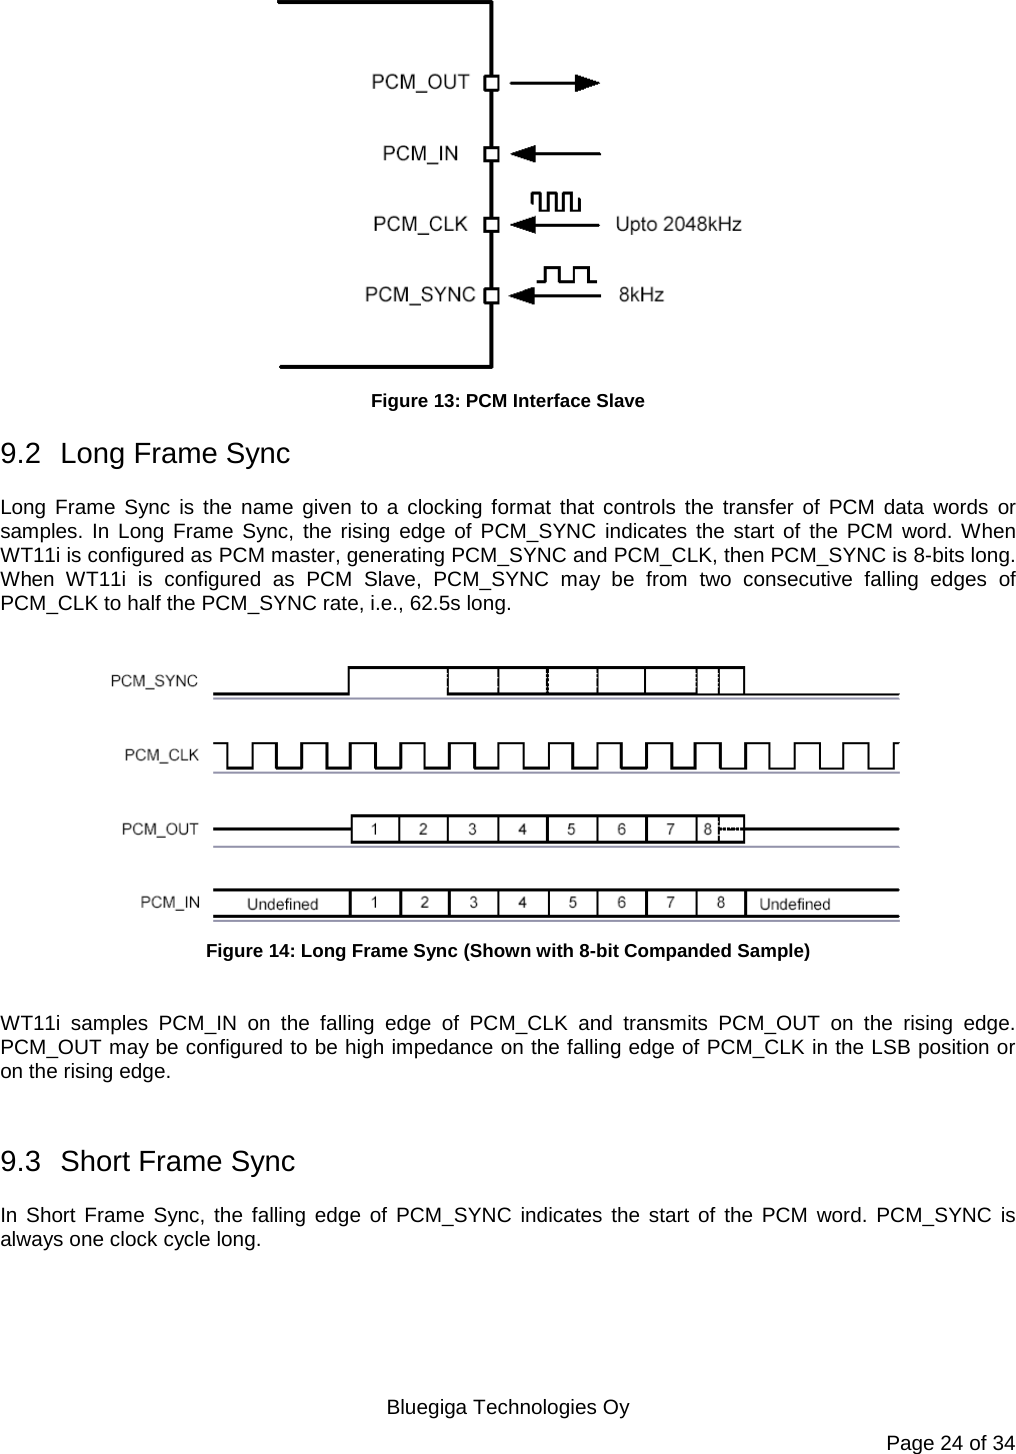   Bluegiga Technologies Oy Page 24 of 34  Figure 13: PCM Interface Slave 9.2 Long Frame Sync Long Frame Sync is the name given to a clocking format that controls the transfer of PCM data words or samples. In Long Frame Sync, the rising edge of PCM_SYNC indicates the start of the PCM word. When WT11i is configured as PCM master, generating PCM_SYNC and PCM_CLK, then PCM_SYNC is 8-bits long. When WT11i is configured as PCM Slave, PCM_SYNC may be from two consecutive falling edges of PCM_CLK to half the PCM_SYNC rate, i.e., 62.5s long.   Figure 14: Long Frame Sync (Shown with 8-bit Companded Sample)  WT11i samples PCM_IN on the falling edge of PCM_CLK and transmits PCM_OUT on the rising edge. PCM_OUT may be configured to be high impedance on the falling edge of PCM_CLK in the LSB position or on the rising edge.  9.3  Short Frame Sync In Short Frame Sync, the falling edge of PCM_SYNC indicates the start of the PCM word. PCM_SYNC is always one clock cycle long. 